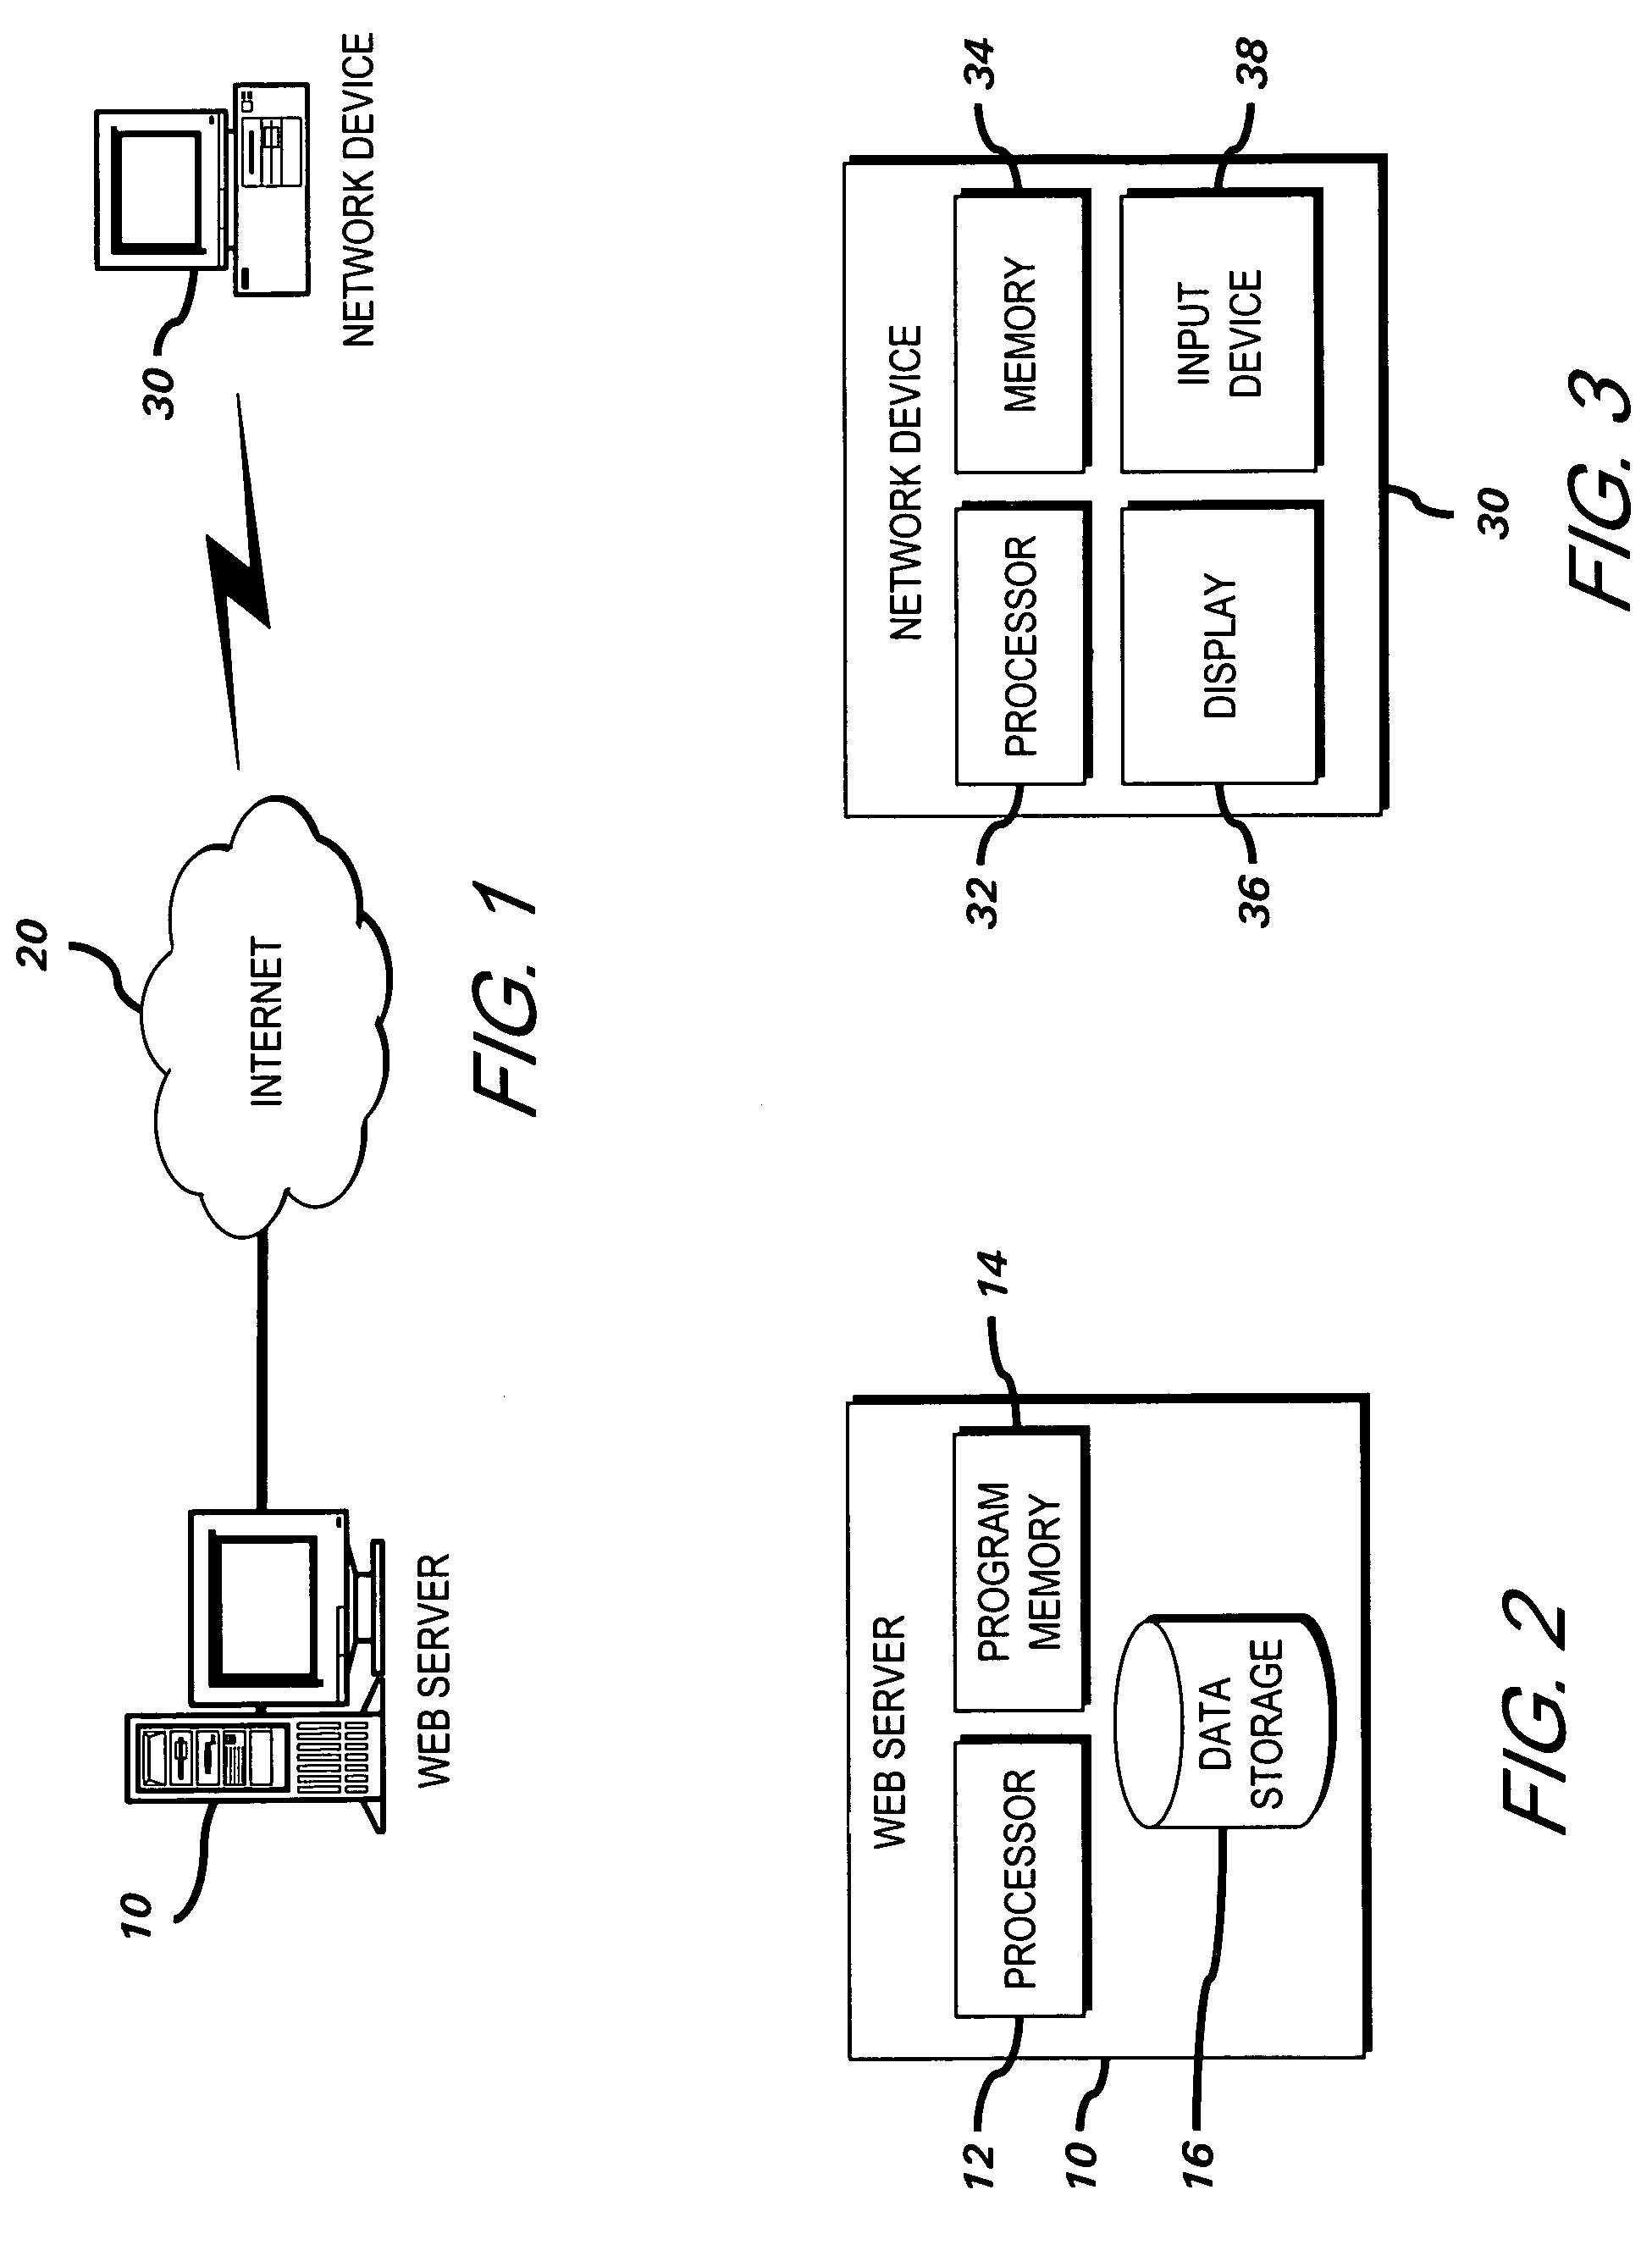 Targeted marketing system and method